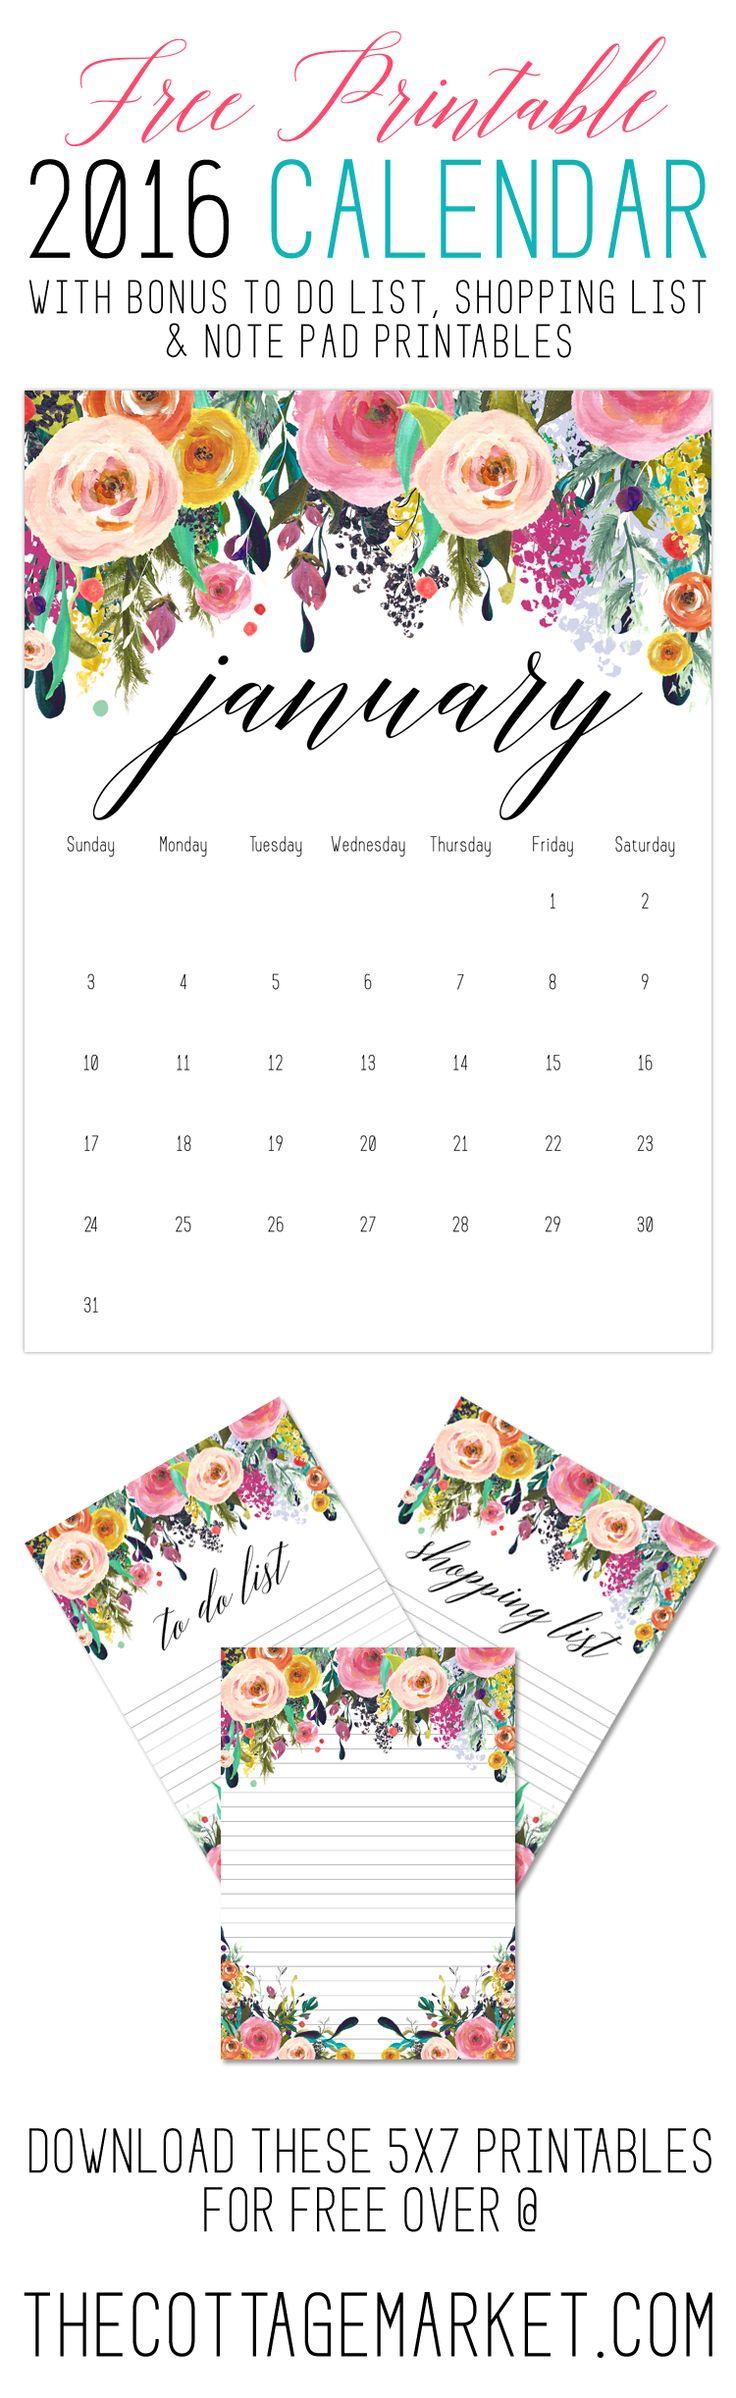 Hochzeit - Free Printable 2016 Calendar /// With Bonus Free To Do List, Shopping List & Note Pad Printables - The Cottage Market